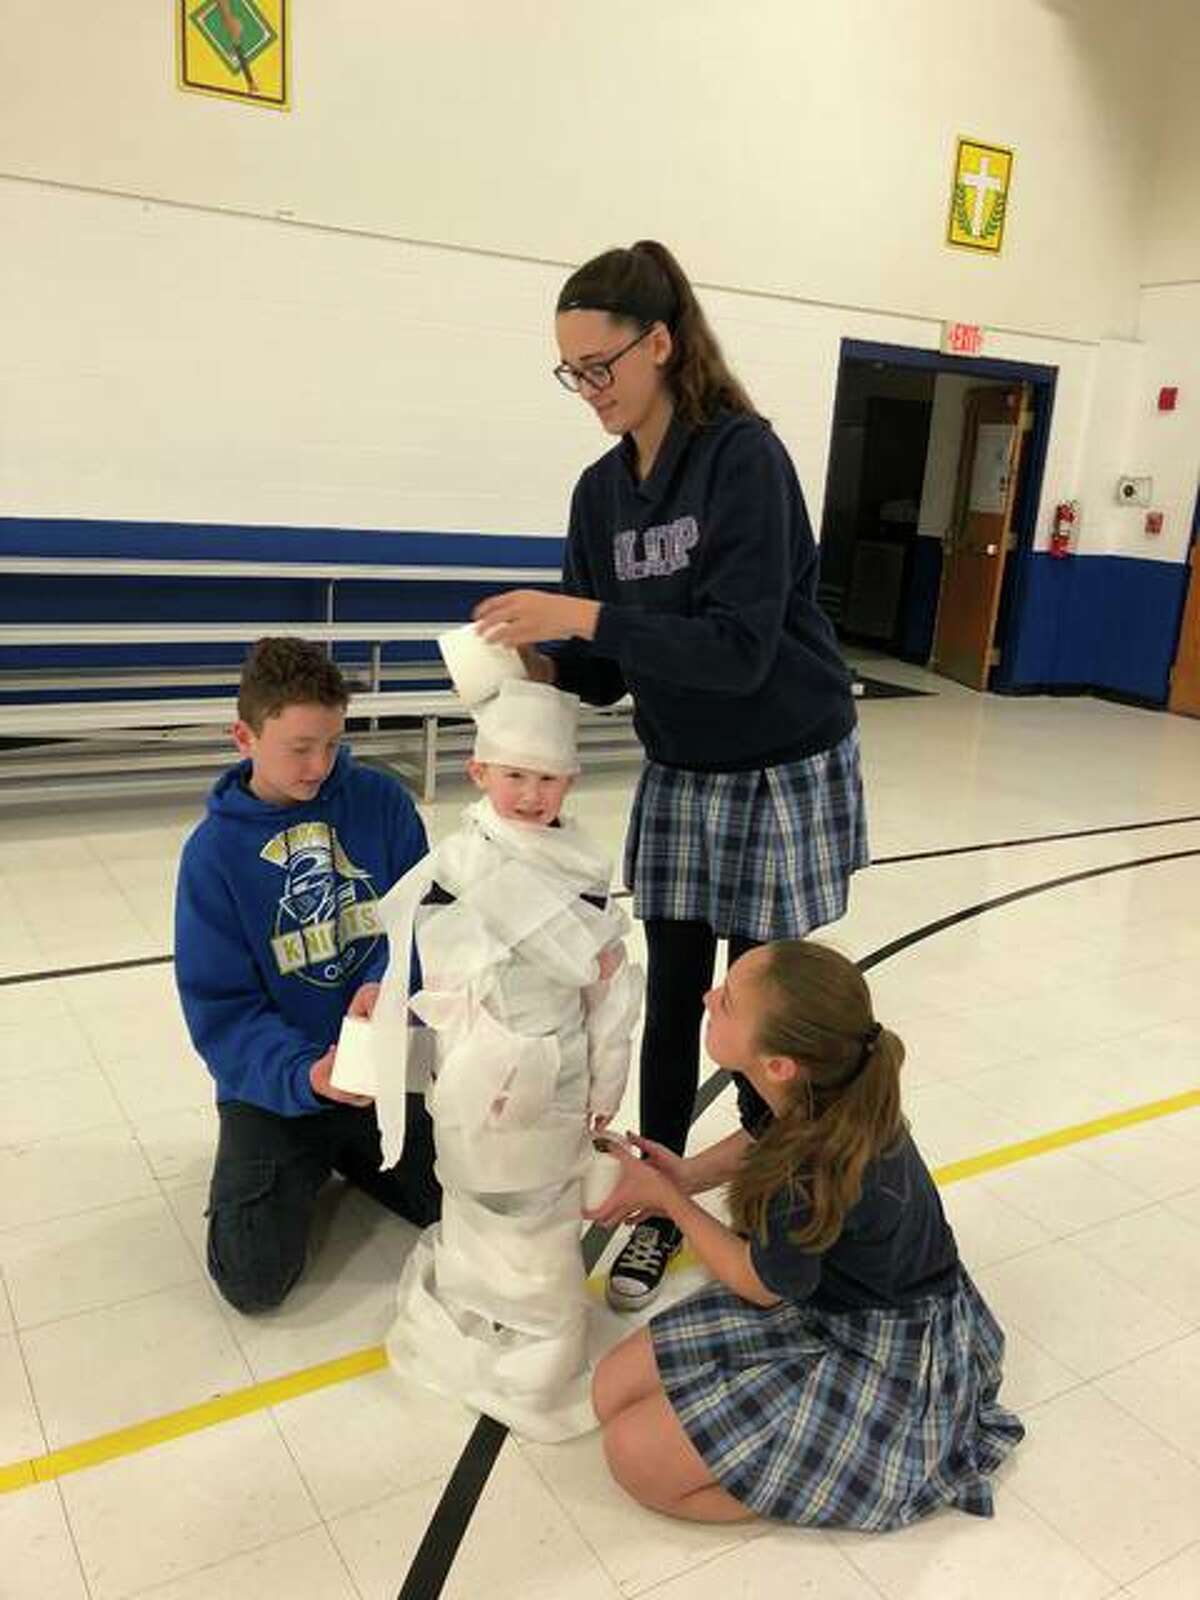 Students, using toilet paper, wrap-up a kindergartner during a recent Christmas party, to make him look like a snowman. The children, students at Our Lady Queen of Peace School, are members of the Buddy Program, which pairs an eighth-grader to help a kindergartner for the year.